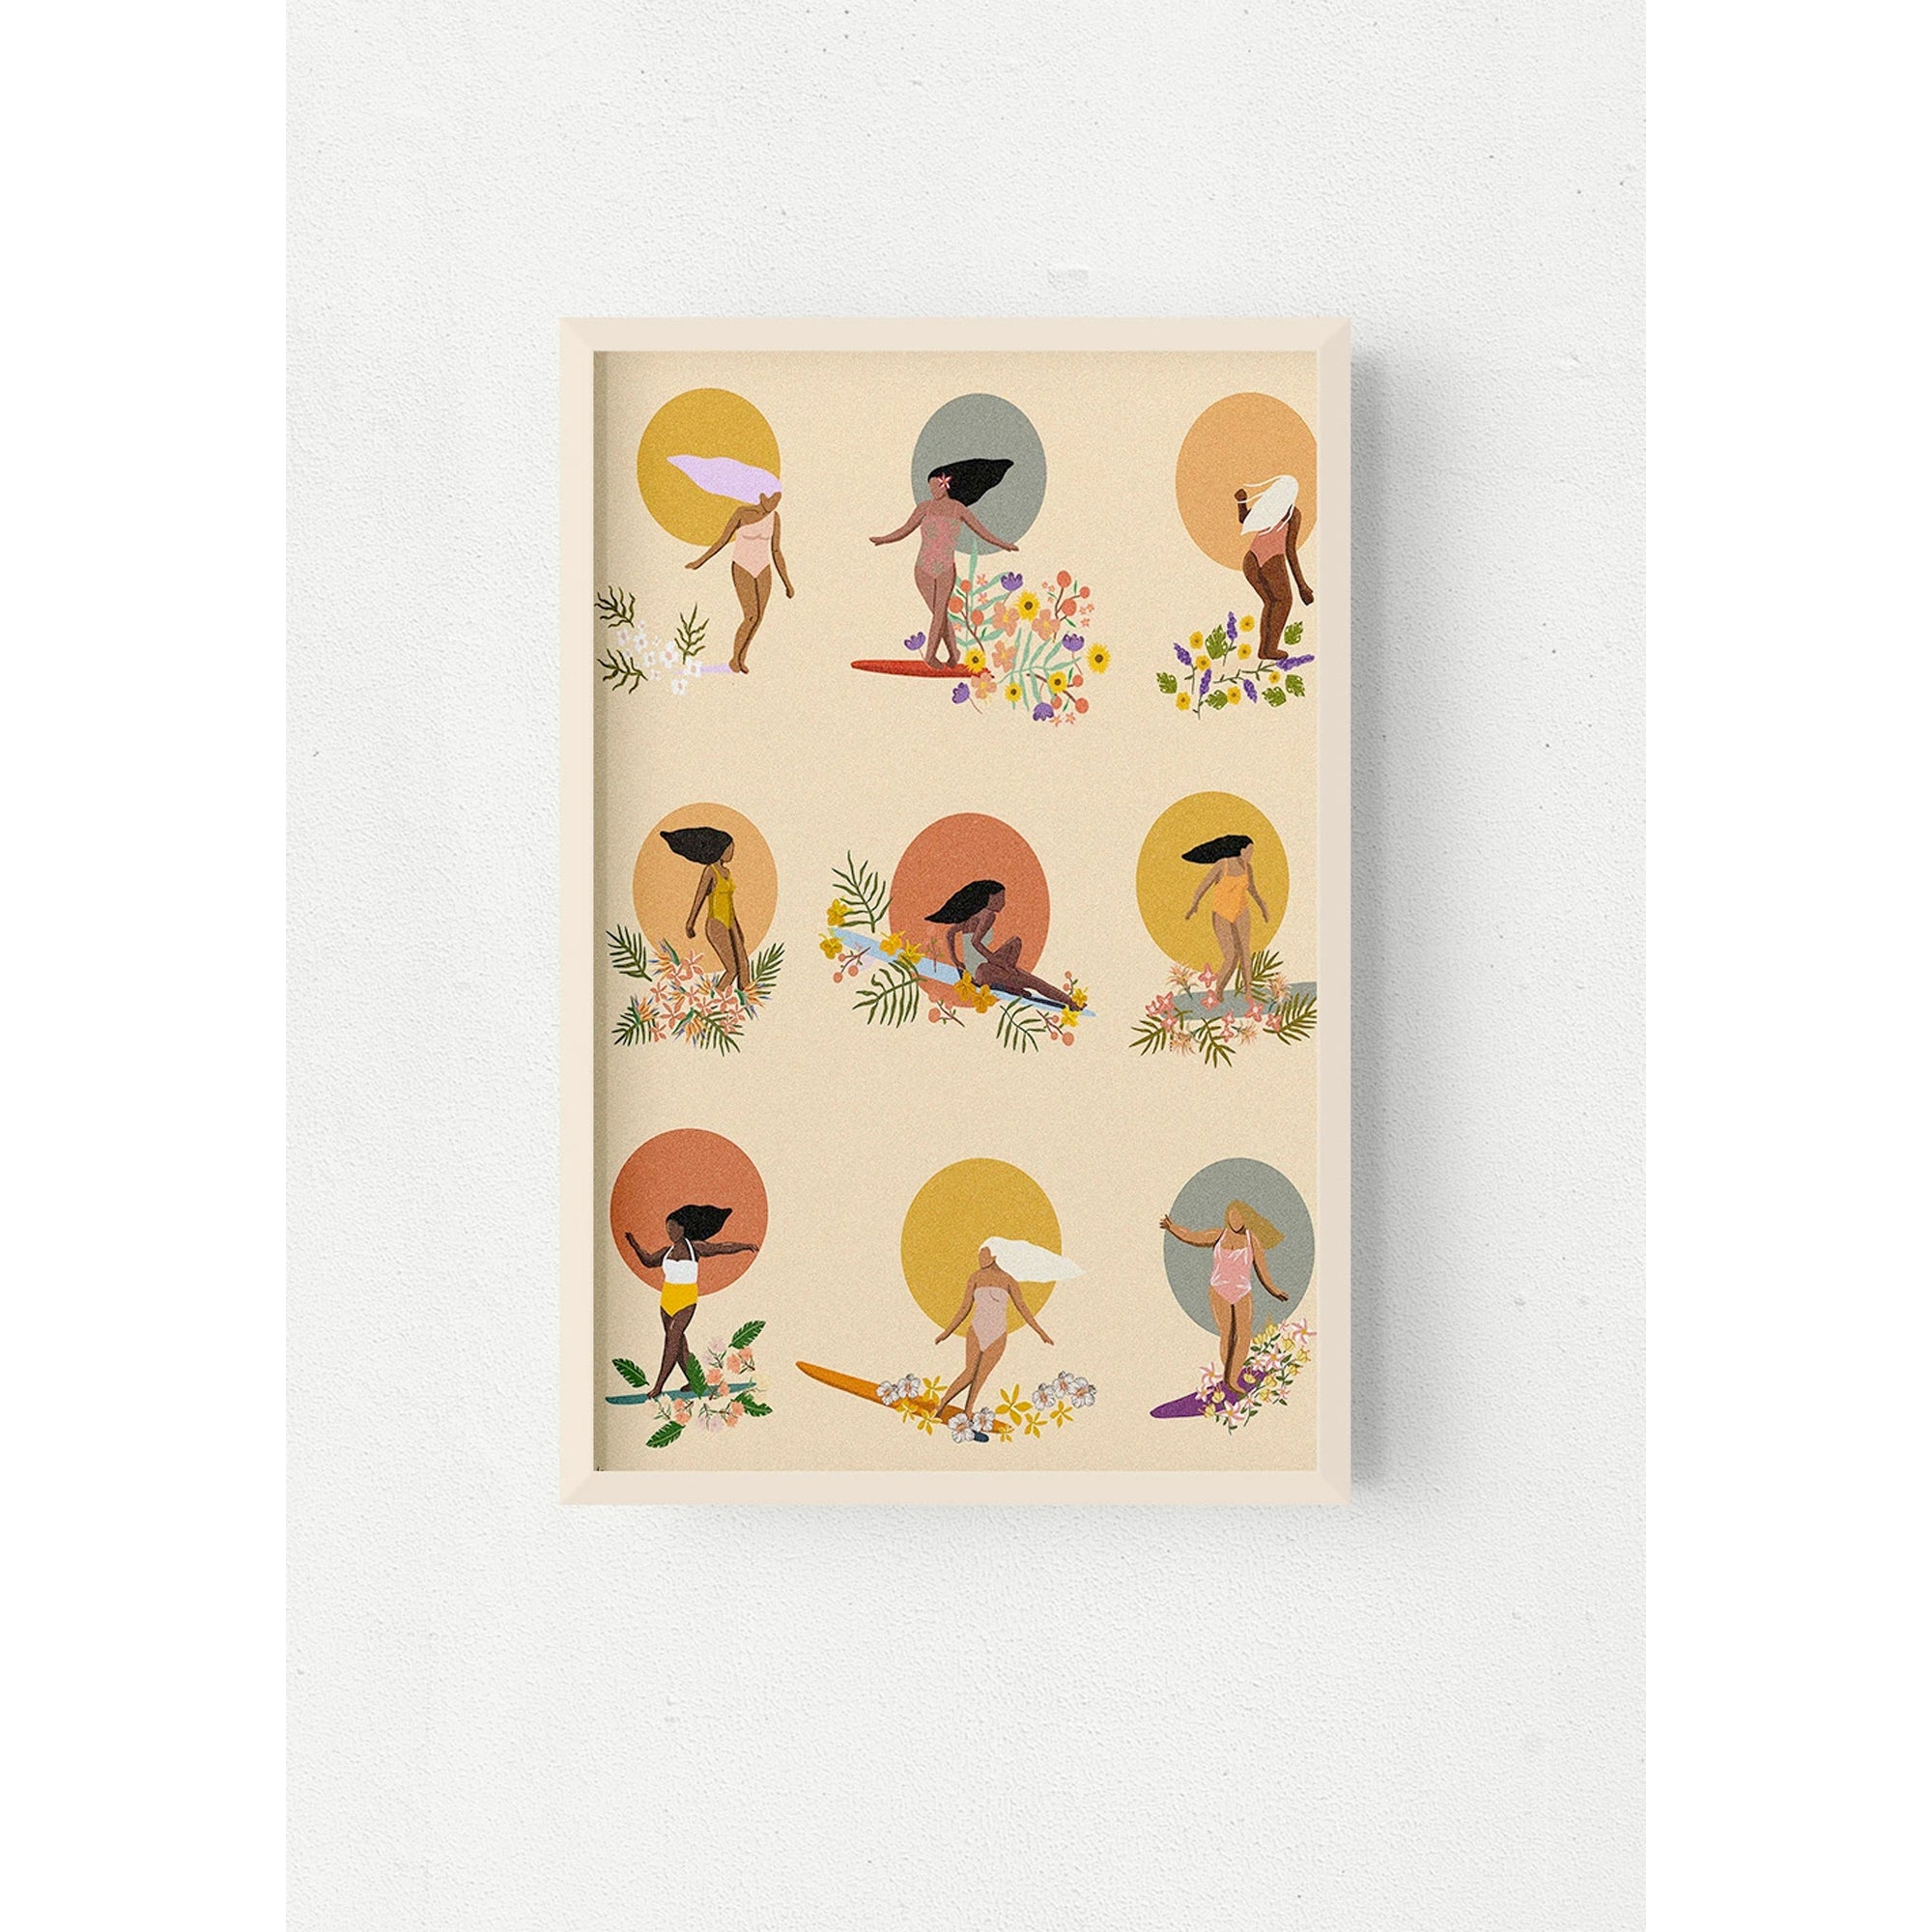 Her Waves Sunset Flowers Print